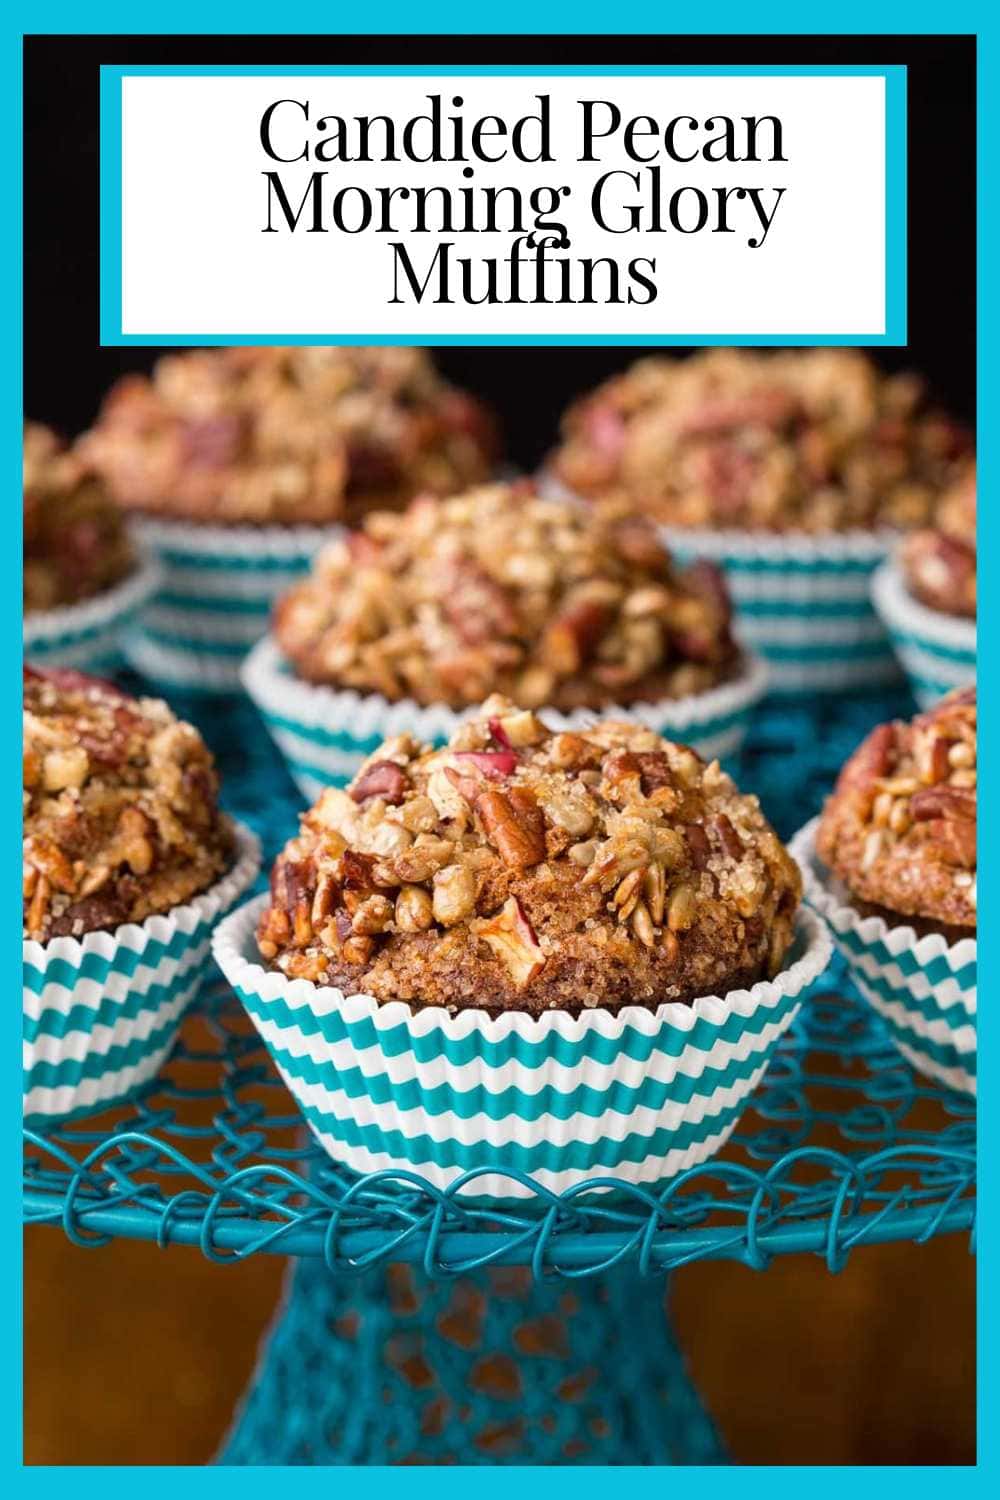 Candied Pecan Morning Glory Muffins